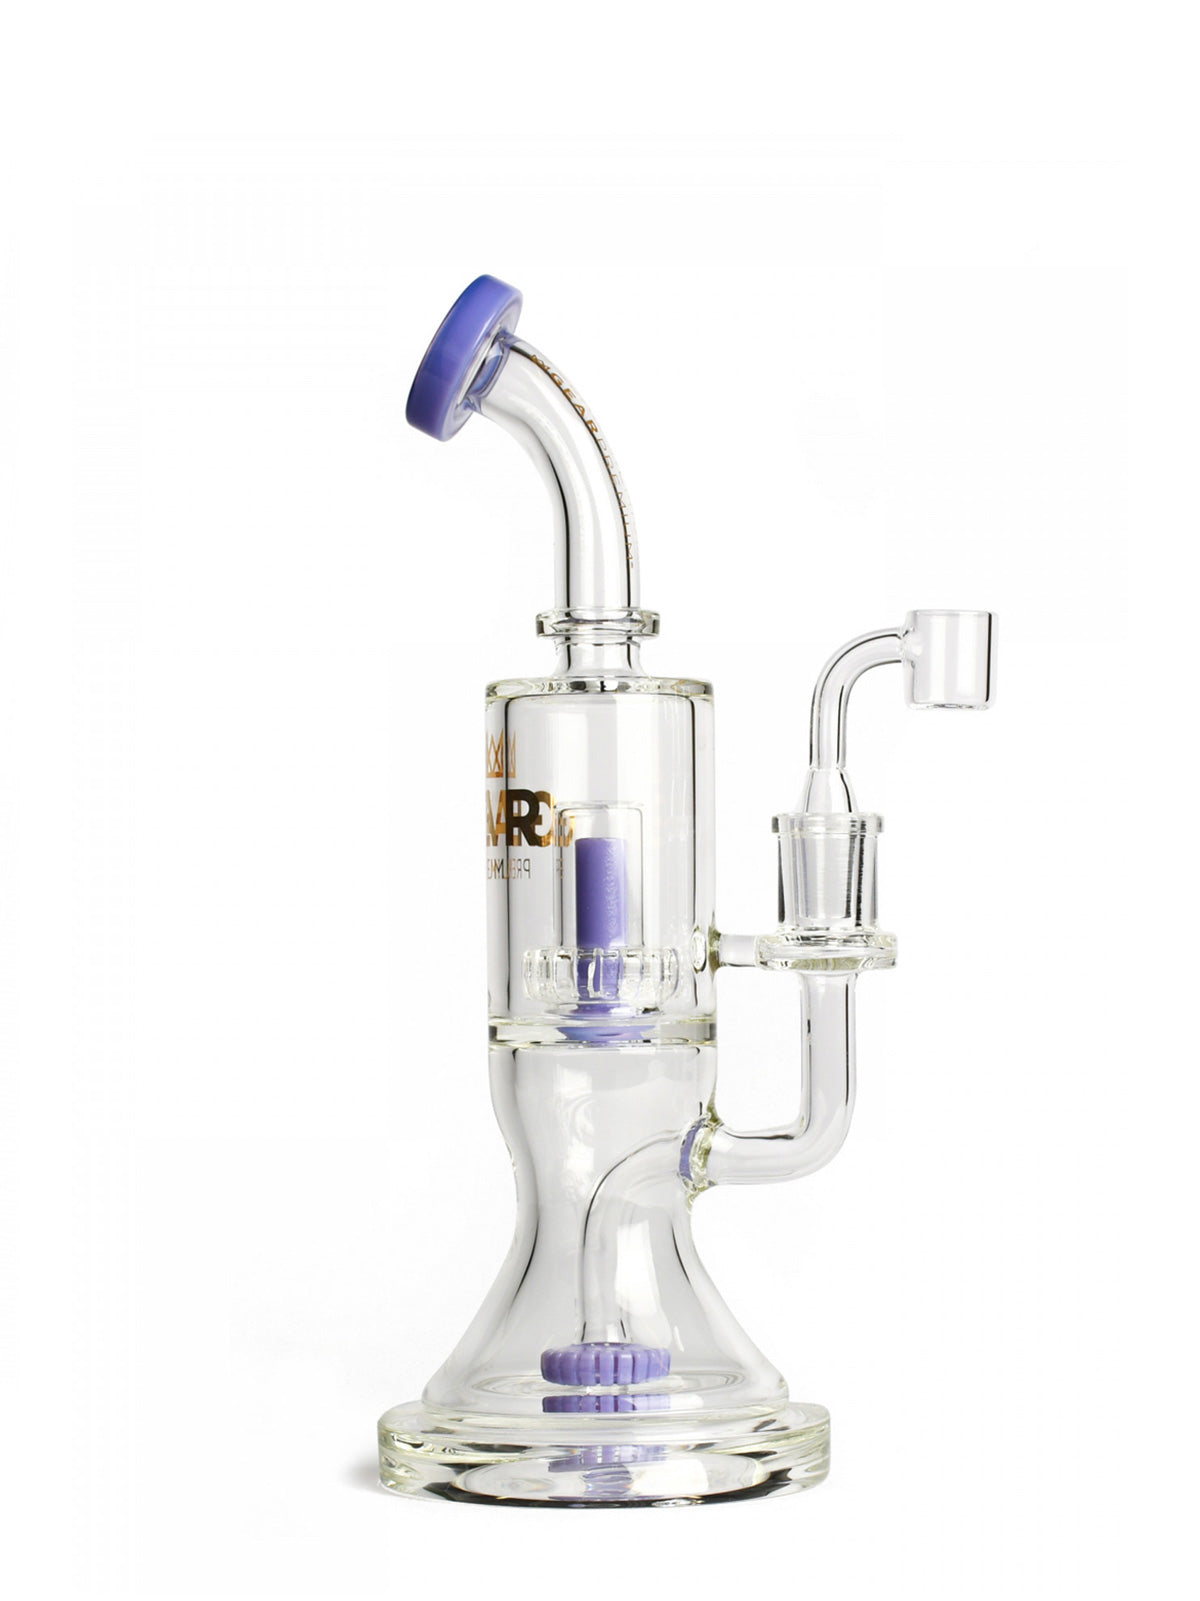 8" Ethereal Dual Chamber Concentrate Bubbler